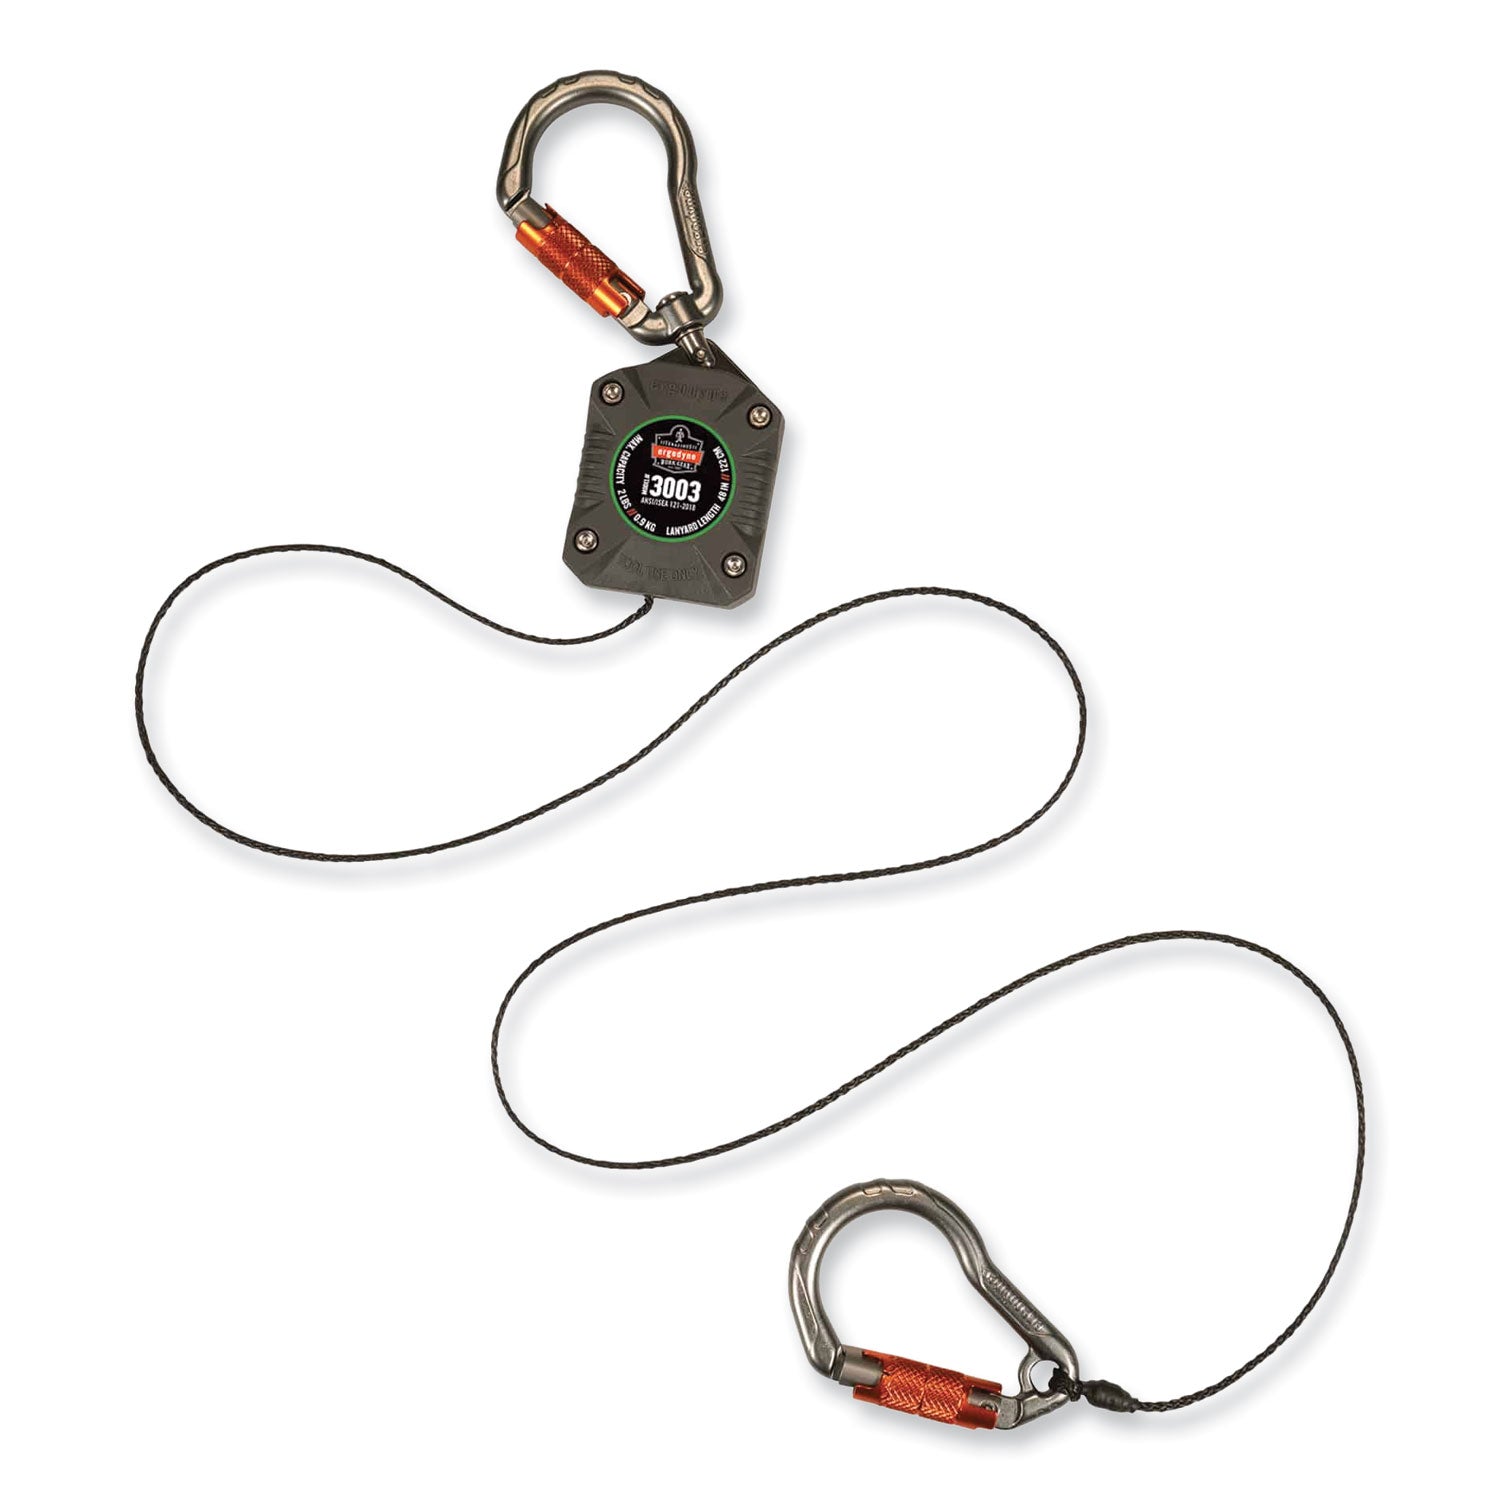 squids-3003-retractable-lanyard-with-two-carabiners-2-lb-max-working-capacity-8-to-48-gray-ships-in-1-3-business-days_ego19303 - 3